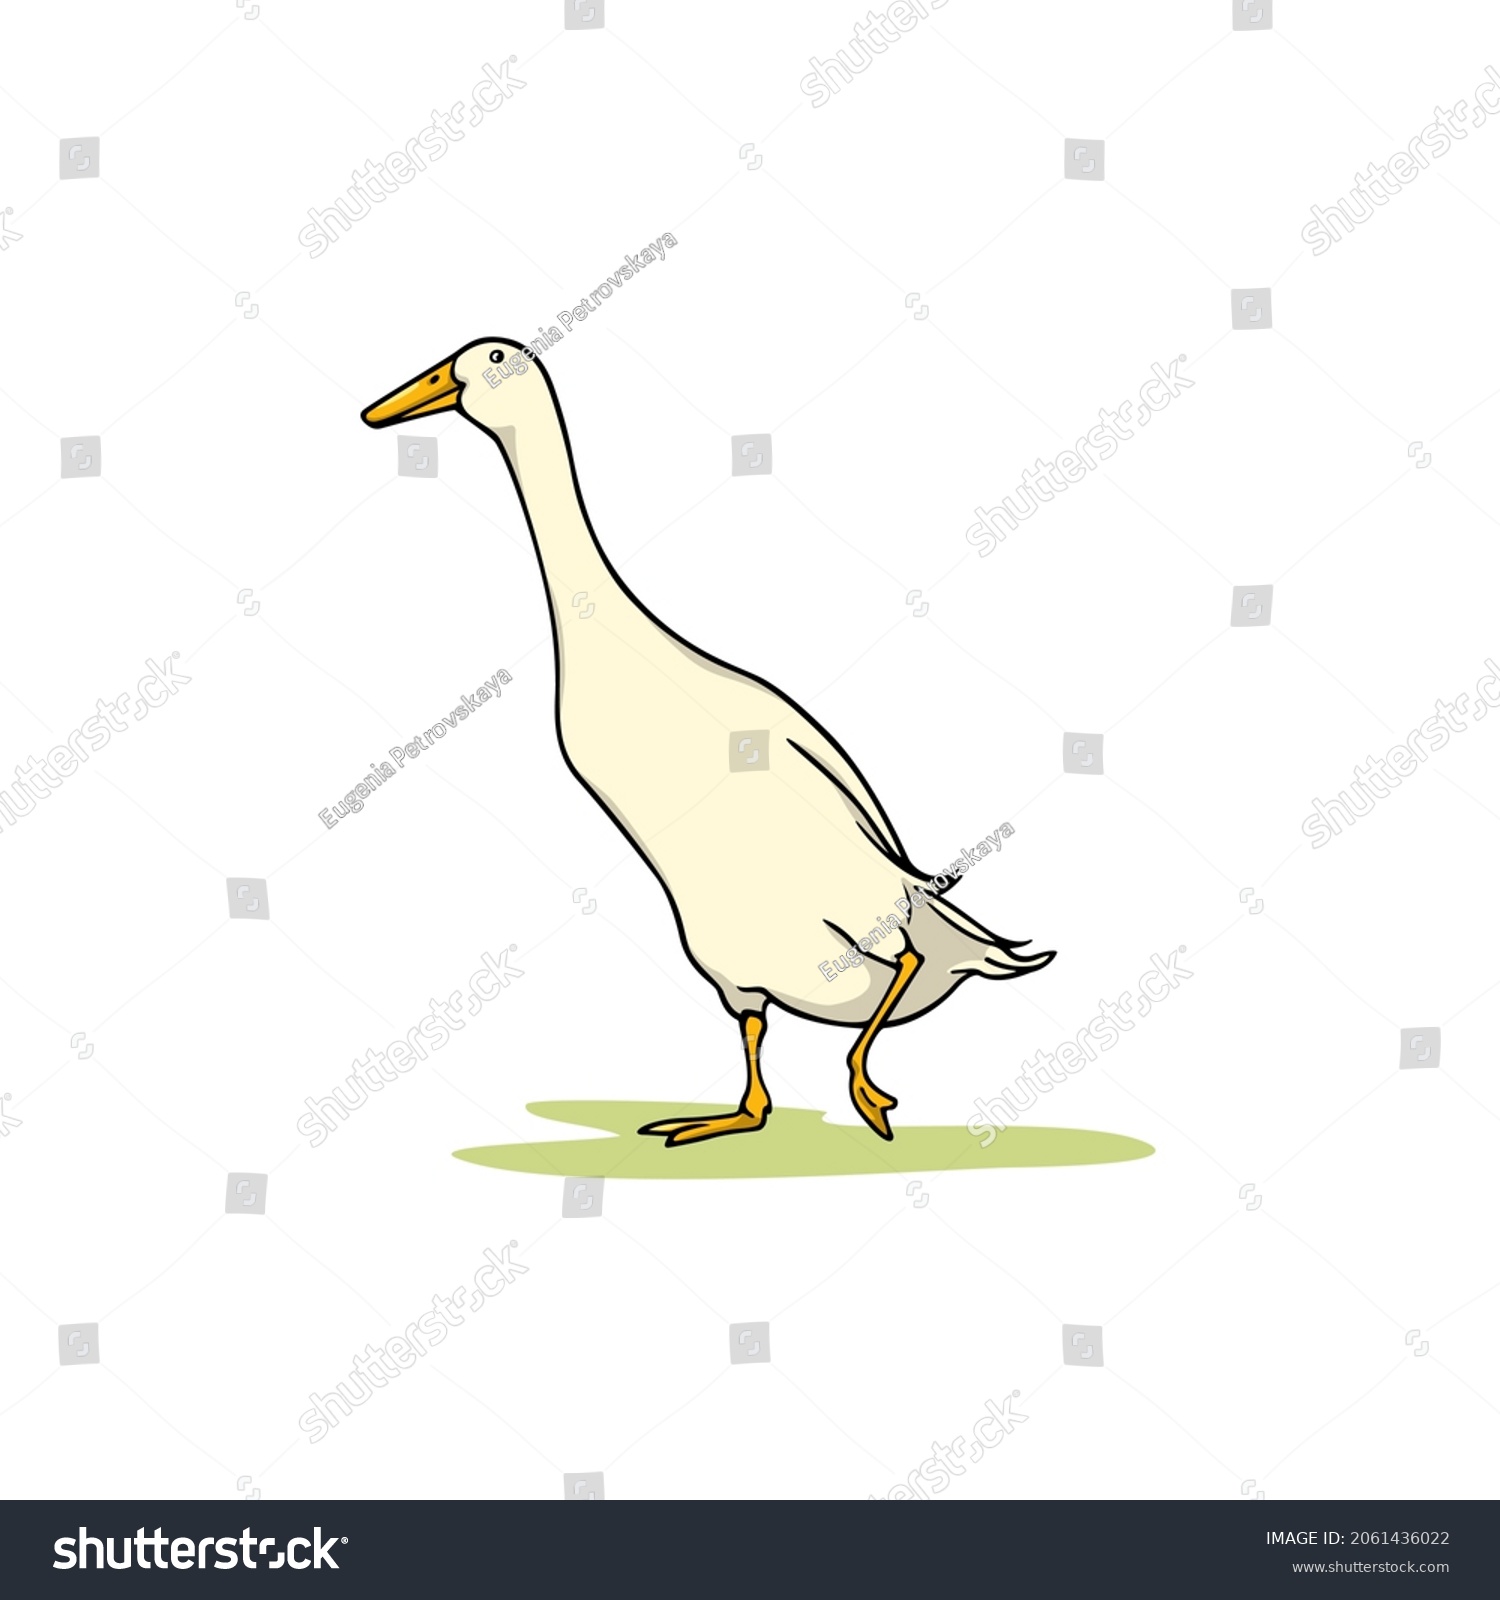 SVG of Vector card with hand drawn cute white Indian Runner duck. Ink drawing, graphic style. Beautiful farm products design elements. svg